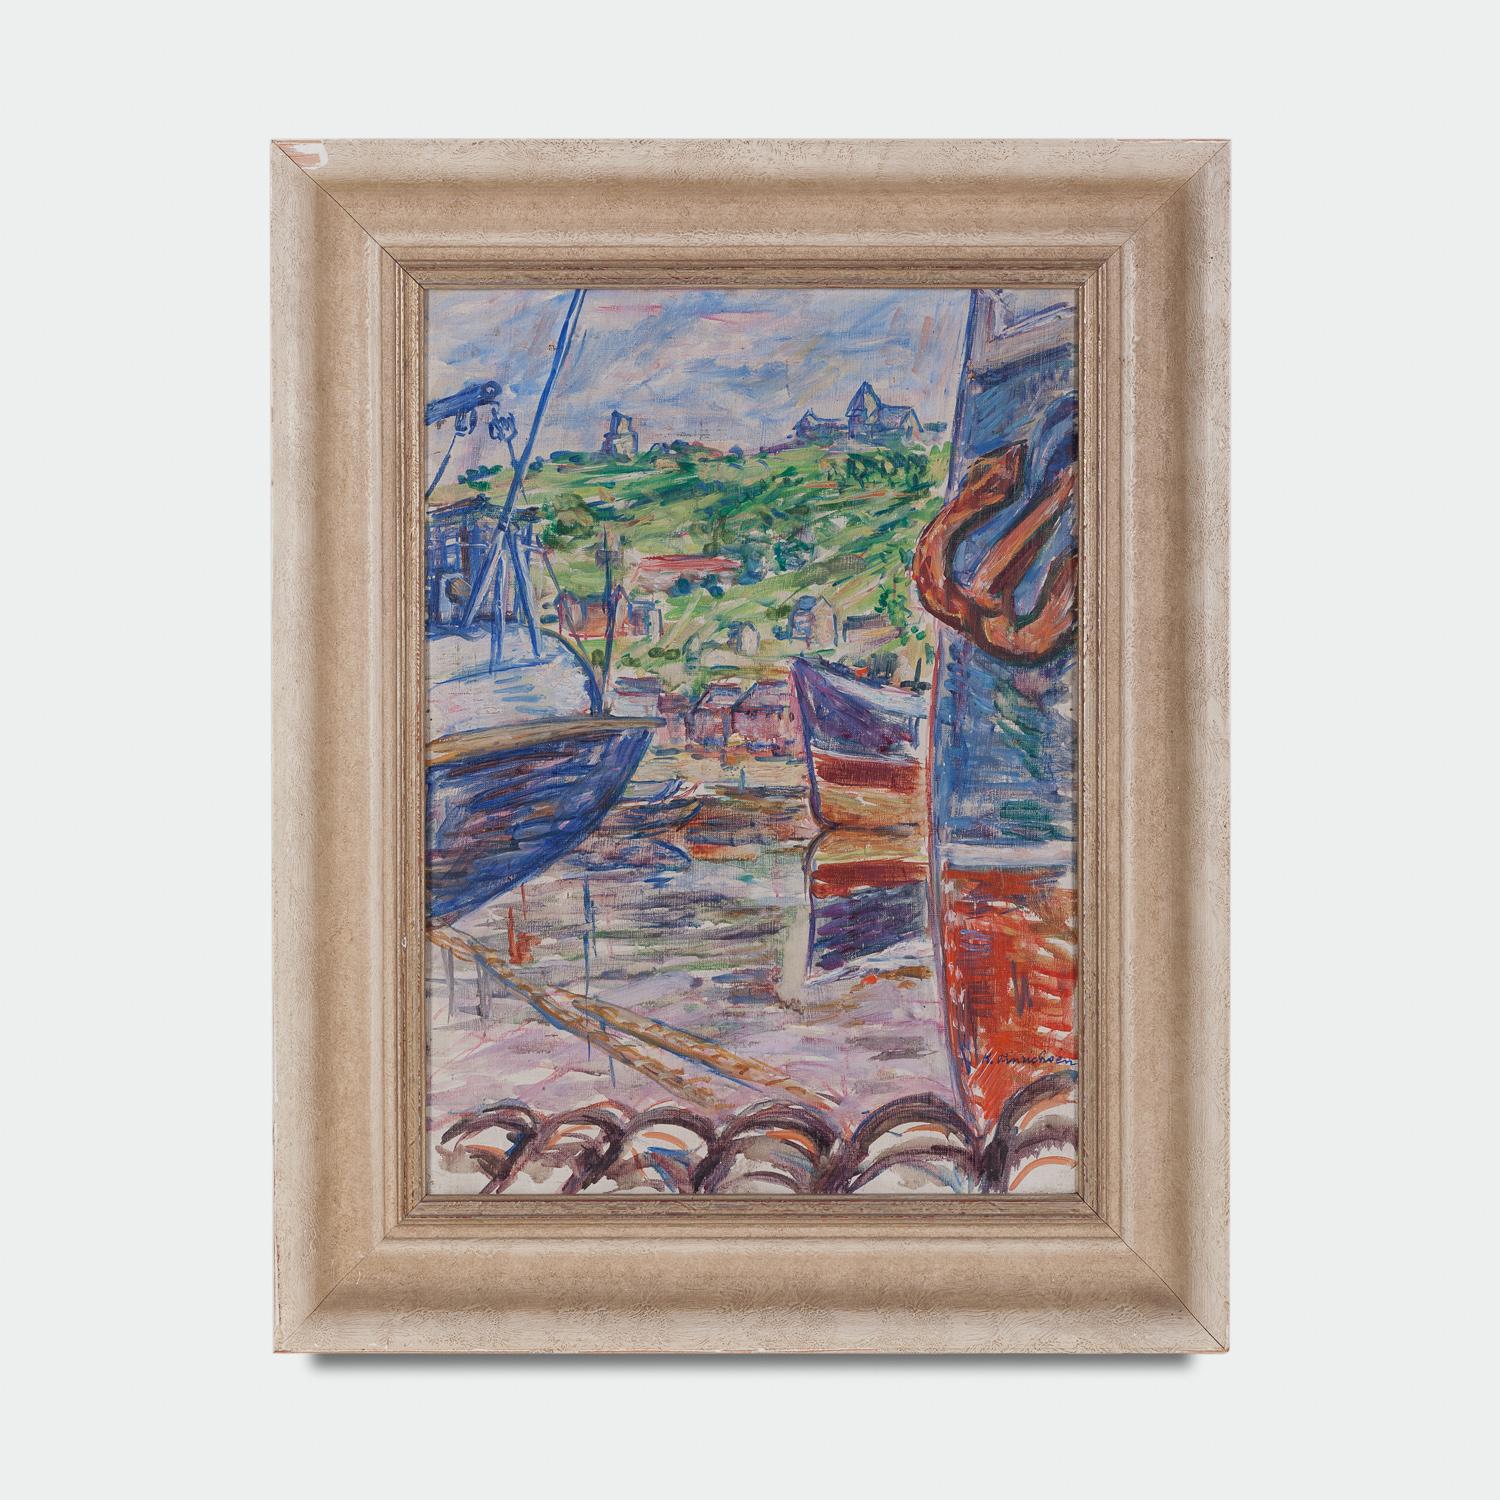 20th century oil on board painting of boats in a harbour by Kurt Hinrichsen (1901-1963). Signed in the lower right corner.

Frame measurements – Height 59cm x 45cm. Painting measurements – Height 43.5cm x Width 31.5cm.


Kurt Hinrichsen was a Swiss